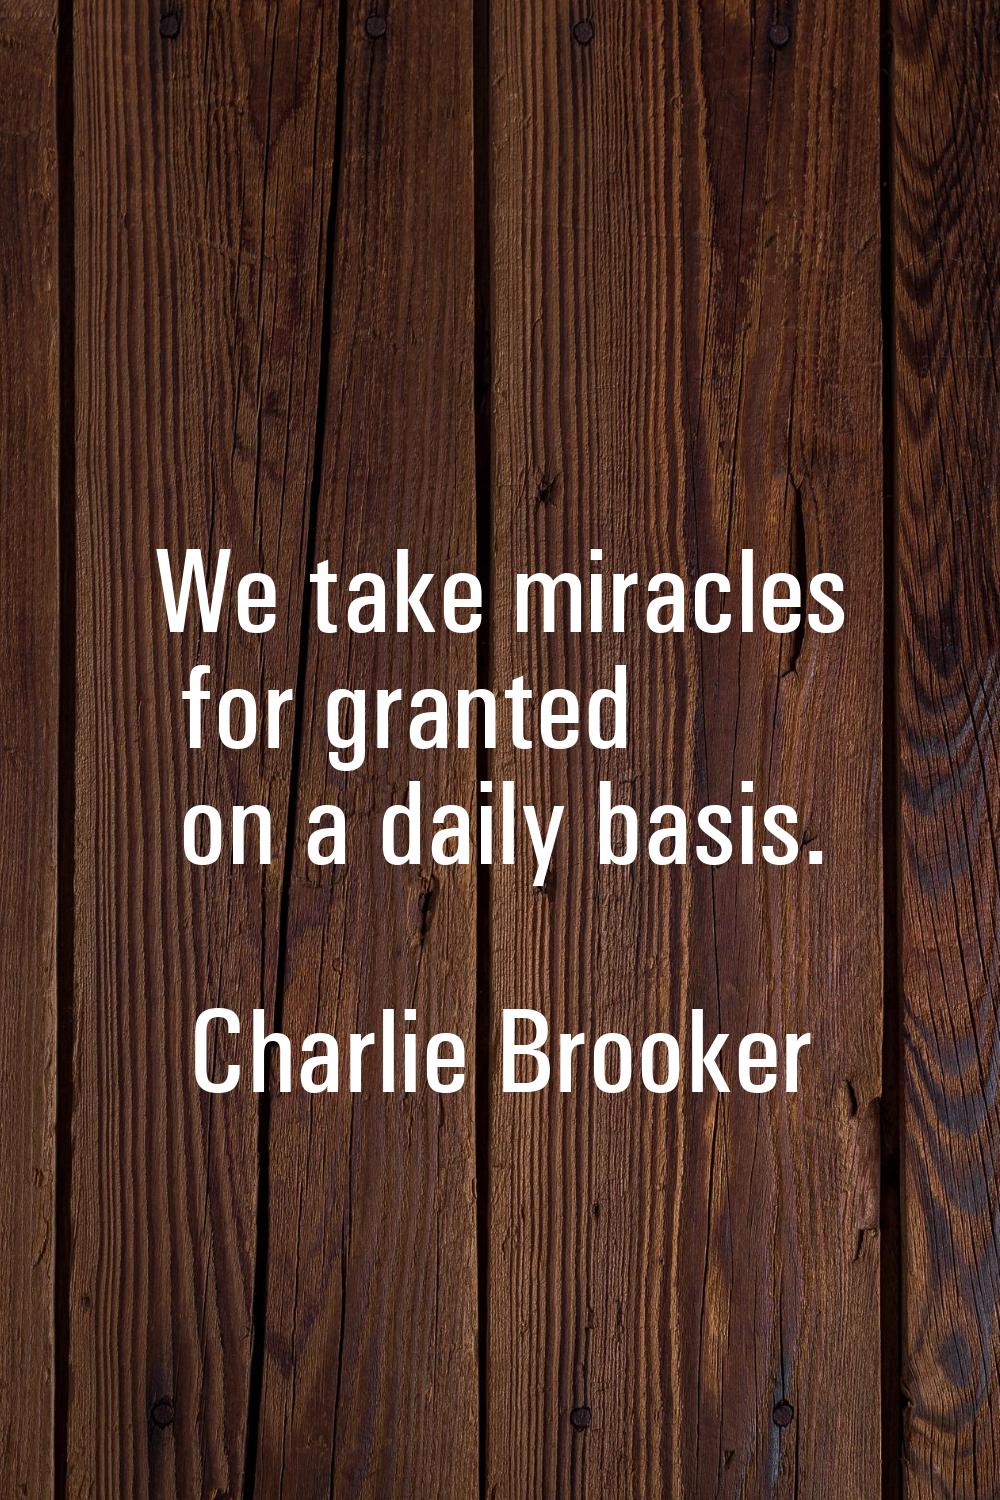 We take miracles for granted on a daily basis.